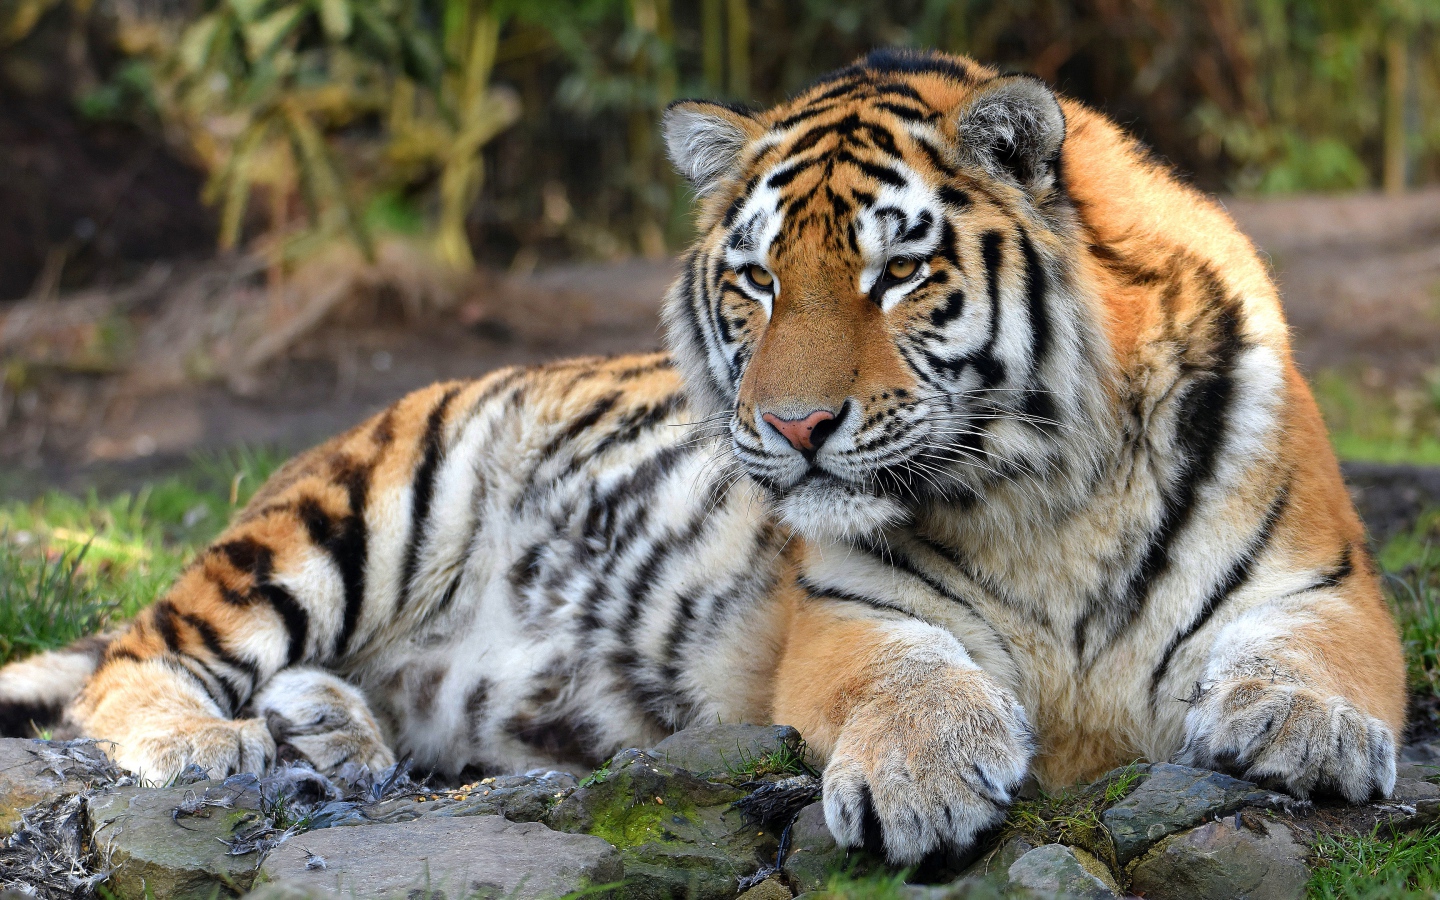 Large striped tiger with large paws